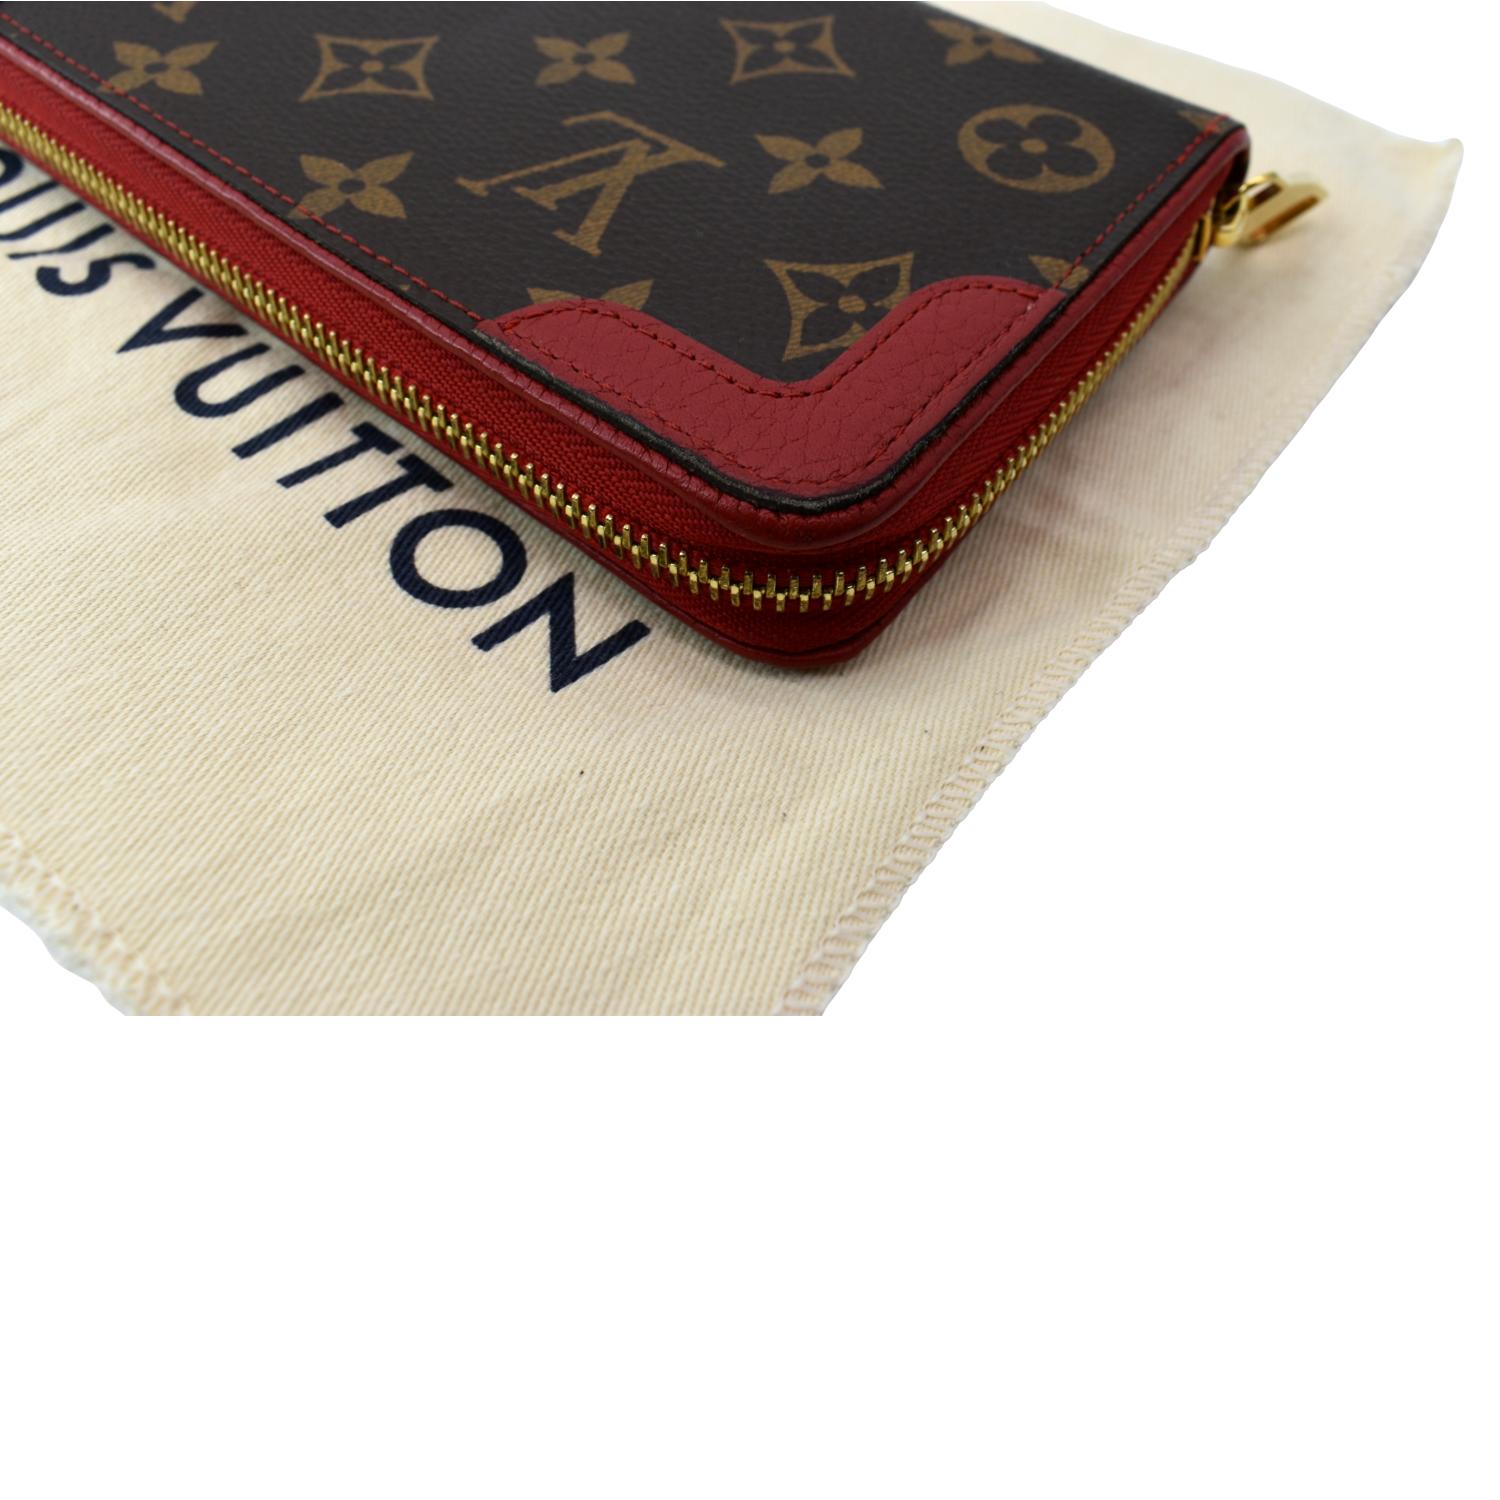 Brown Louis Vuitton Monogram Totally PM Tote Bag, LOUIS VUITTON Retiro Monogram  Canvas Zippy Wallet Cerise Red